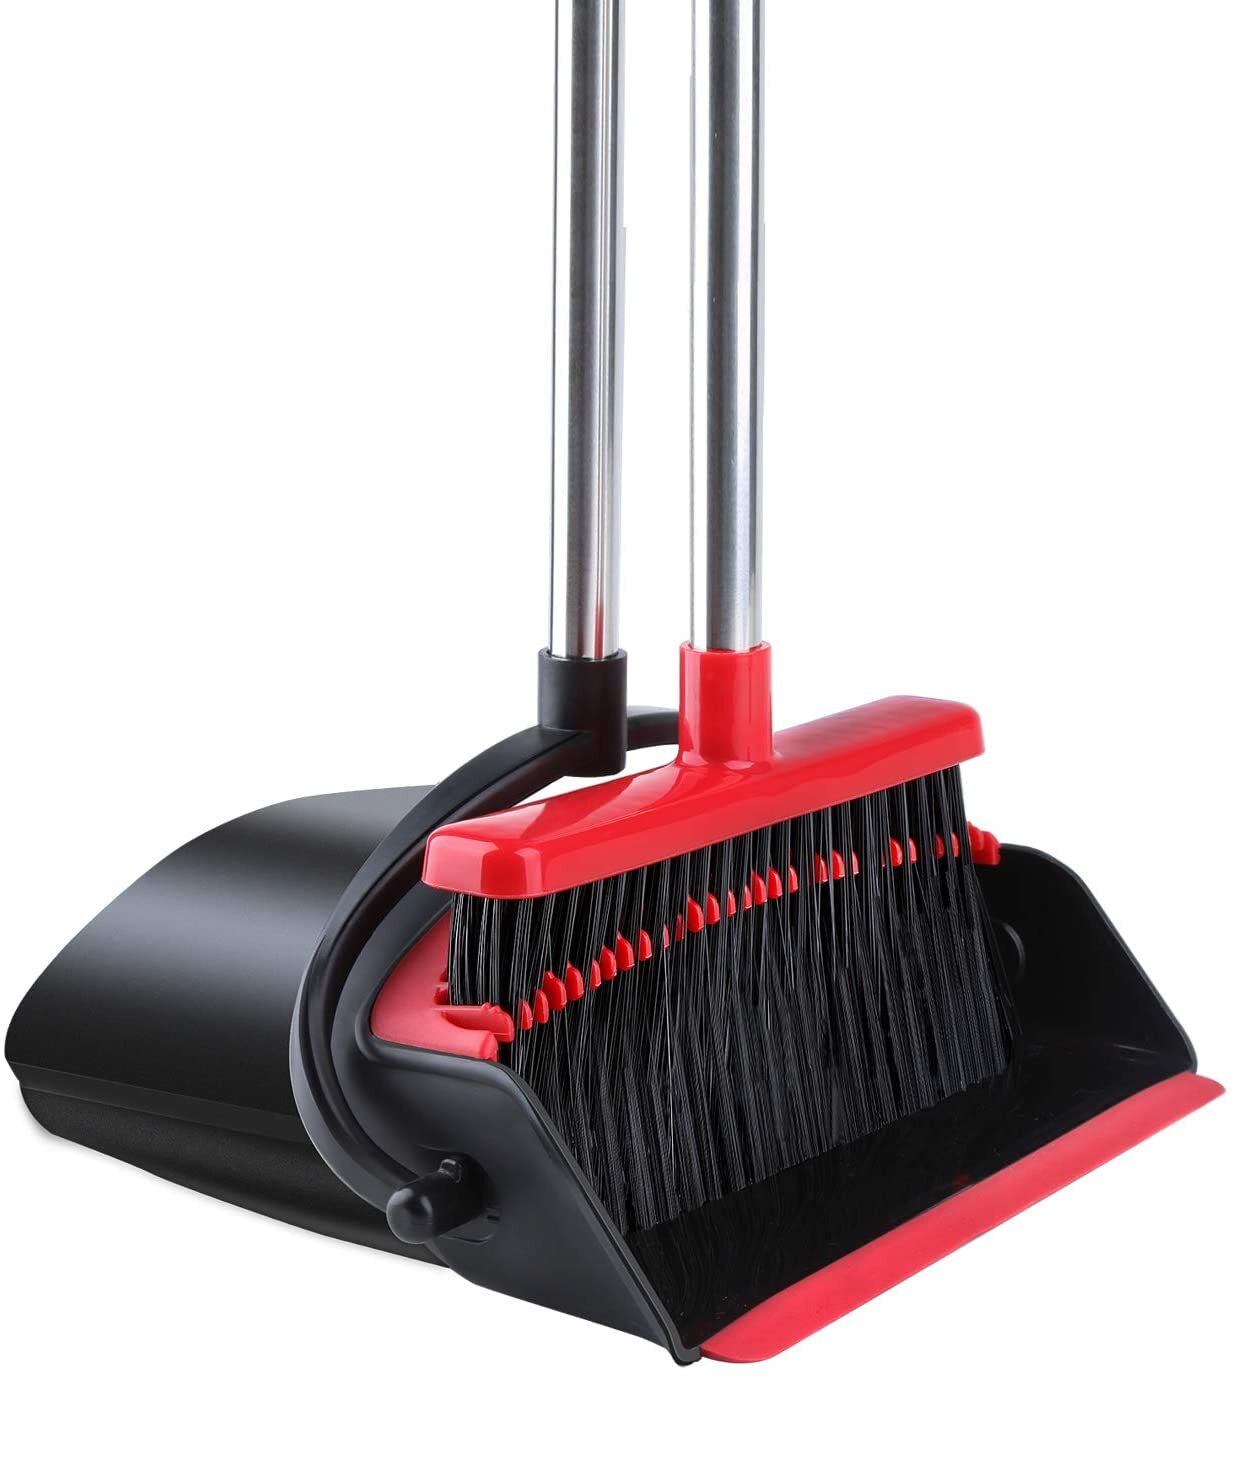 stand and store lobby broom and dustpan setcleaning floor home kitchen with 